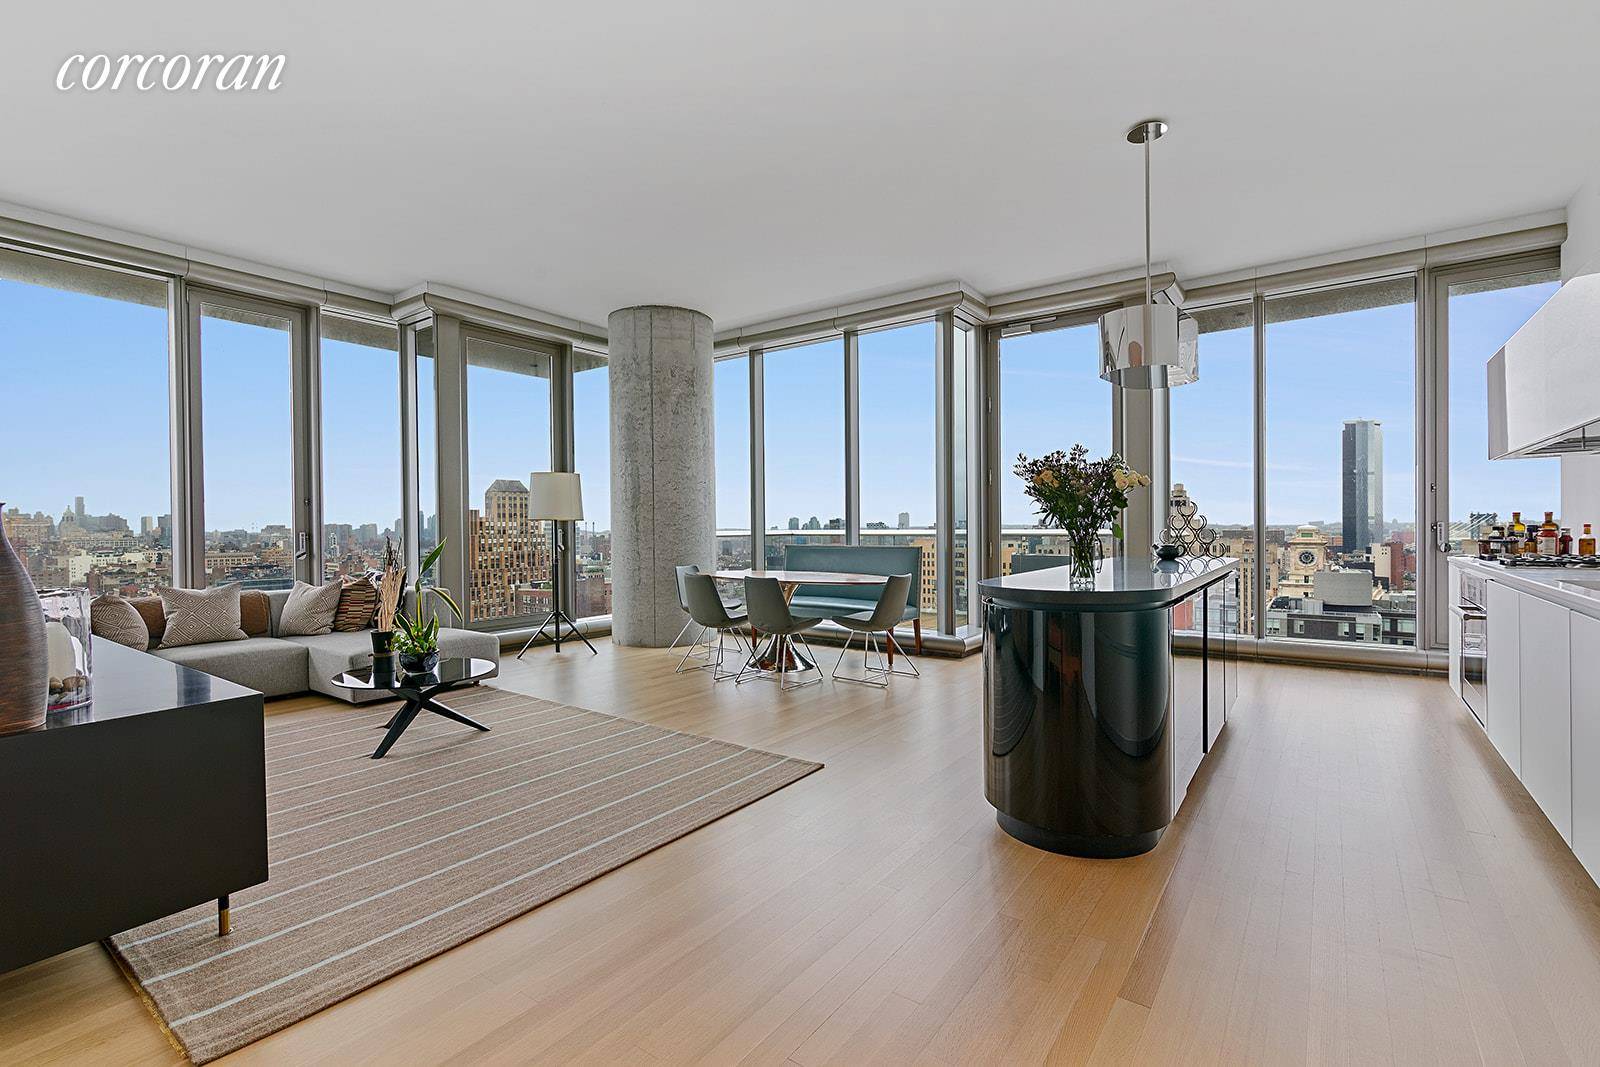 The iconic 56 Leonard Street condominium is globally celebrated as one of the most important new buildings of the last decade with magnificent views right in the most vibrant part ...